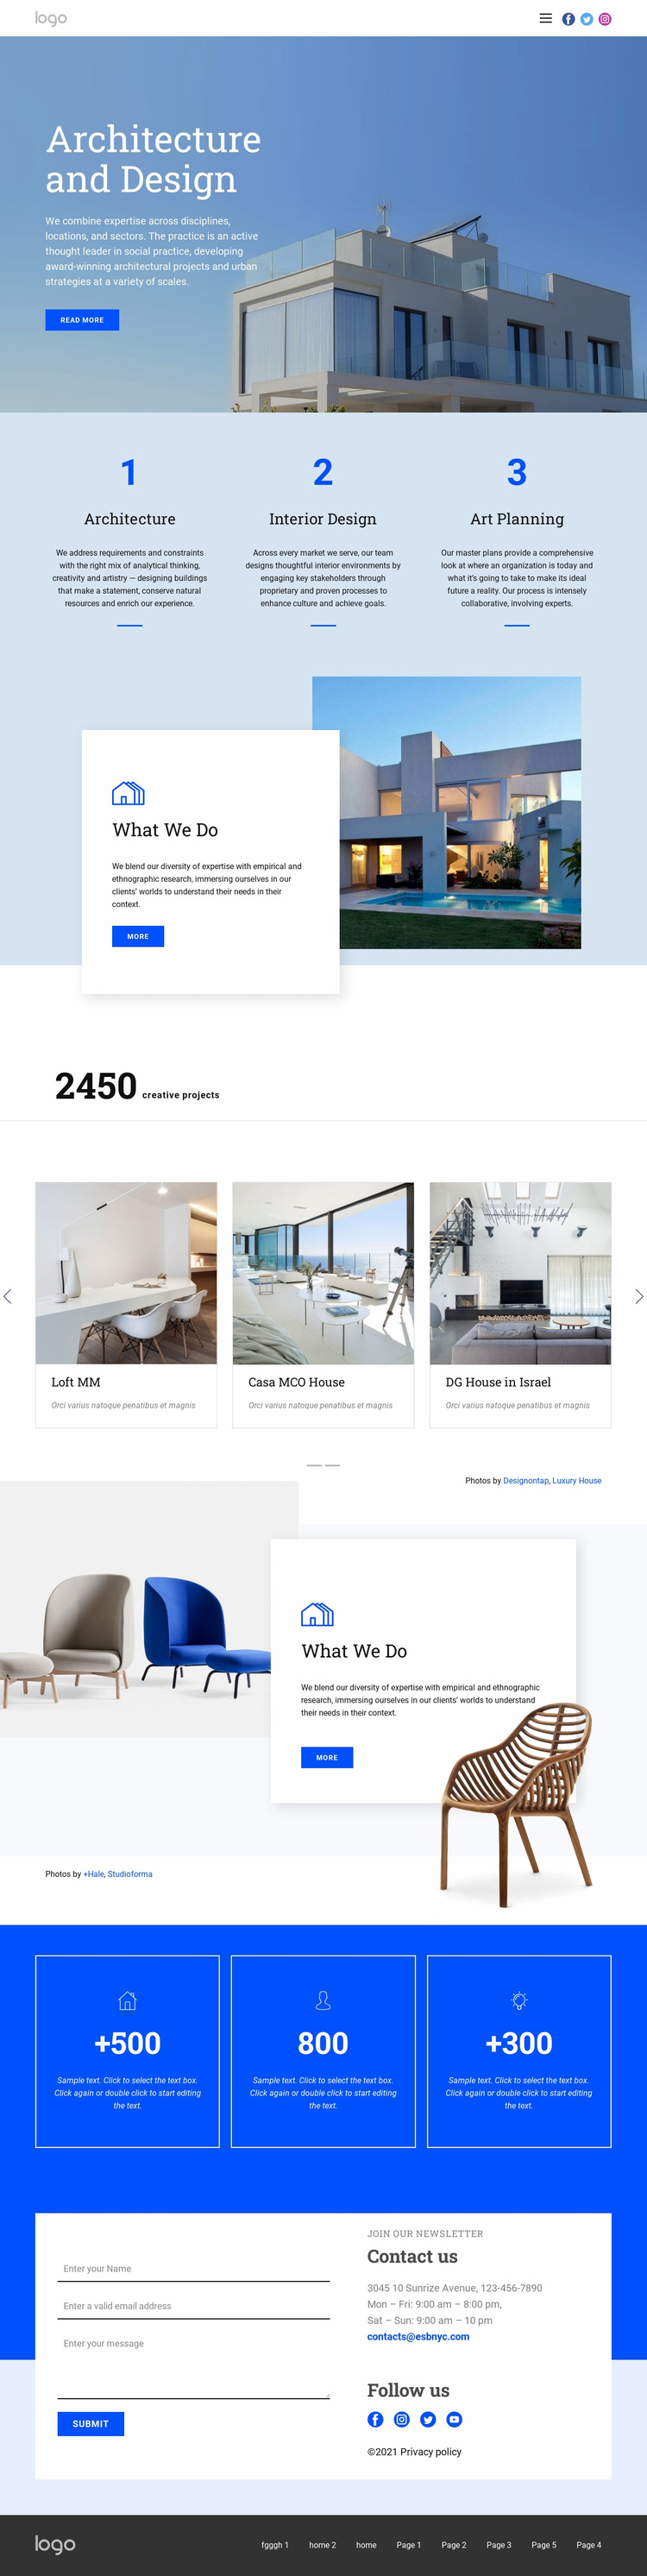 Architecture and design Landing Page